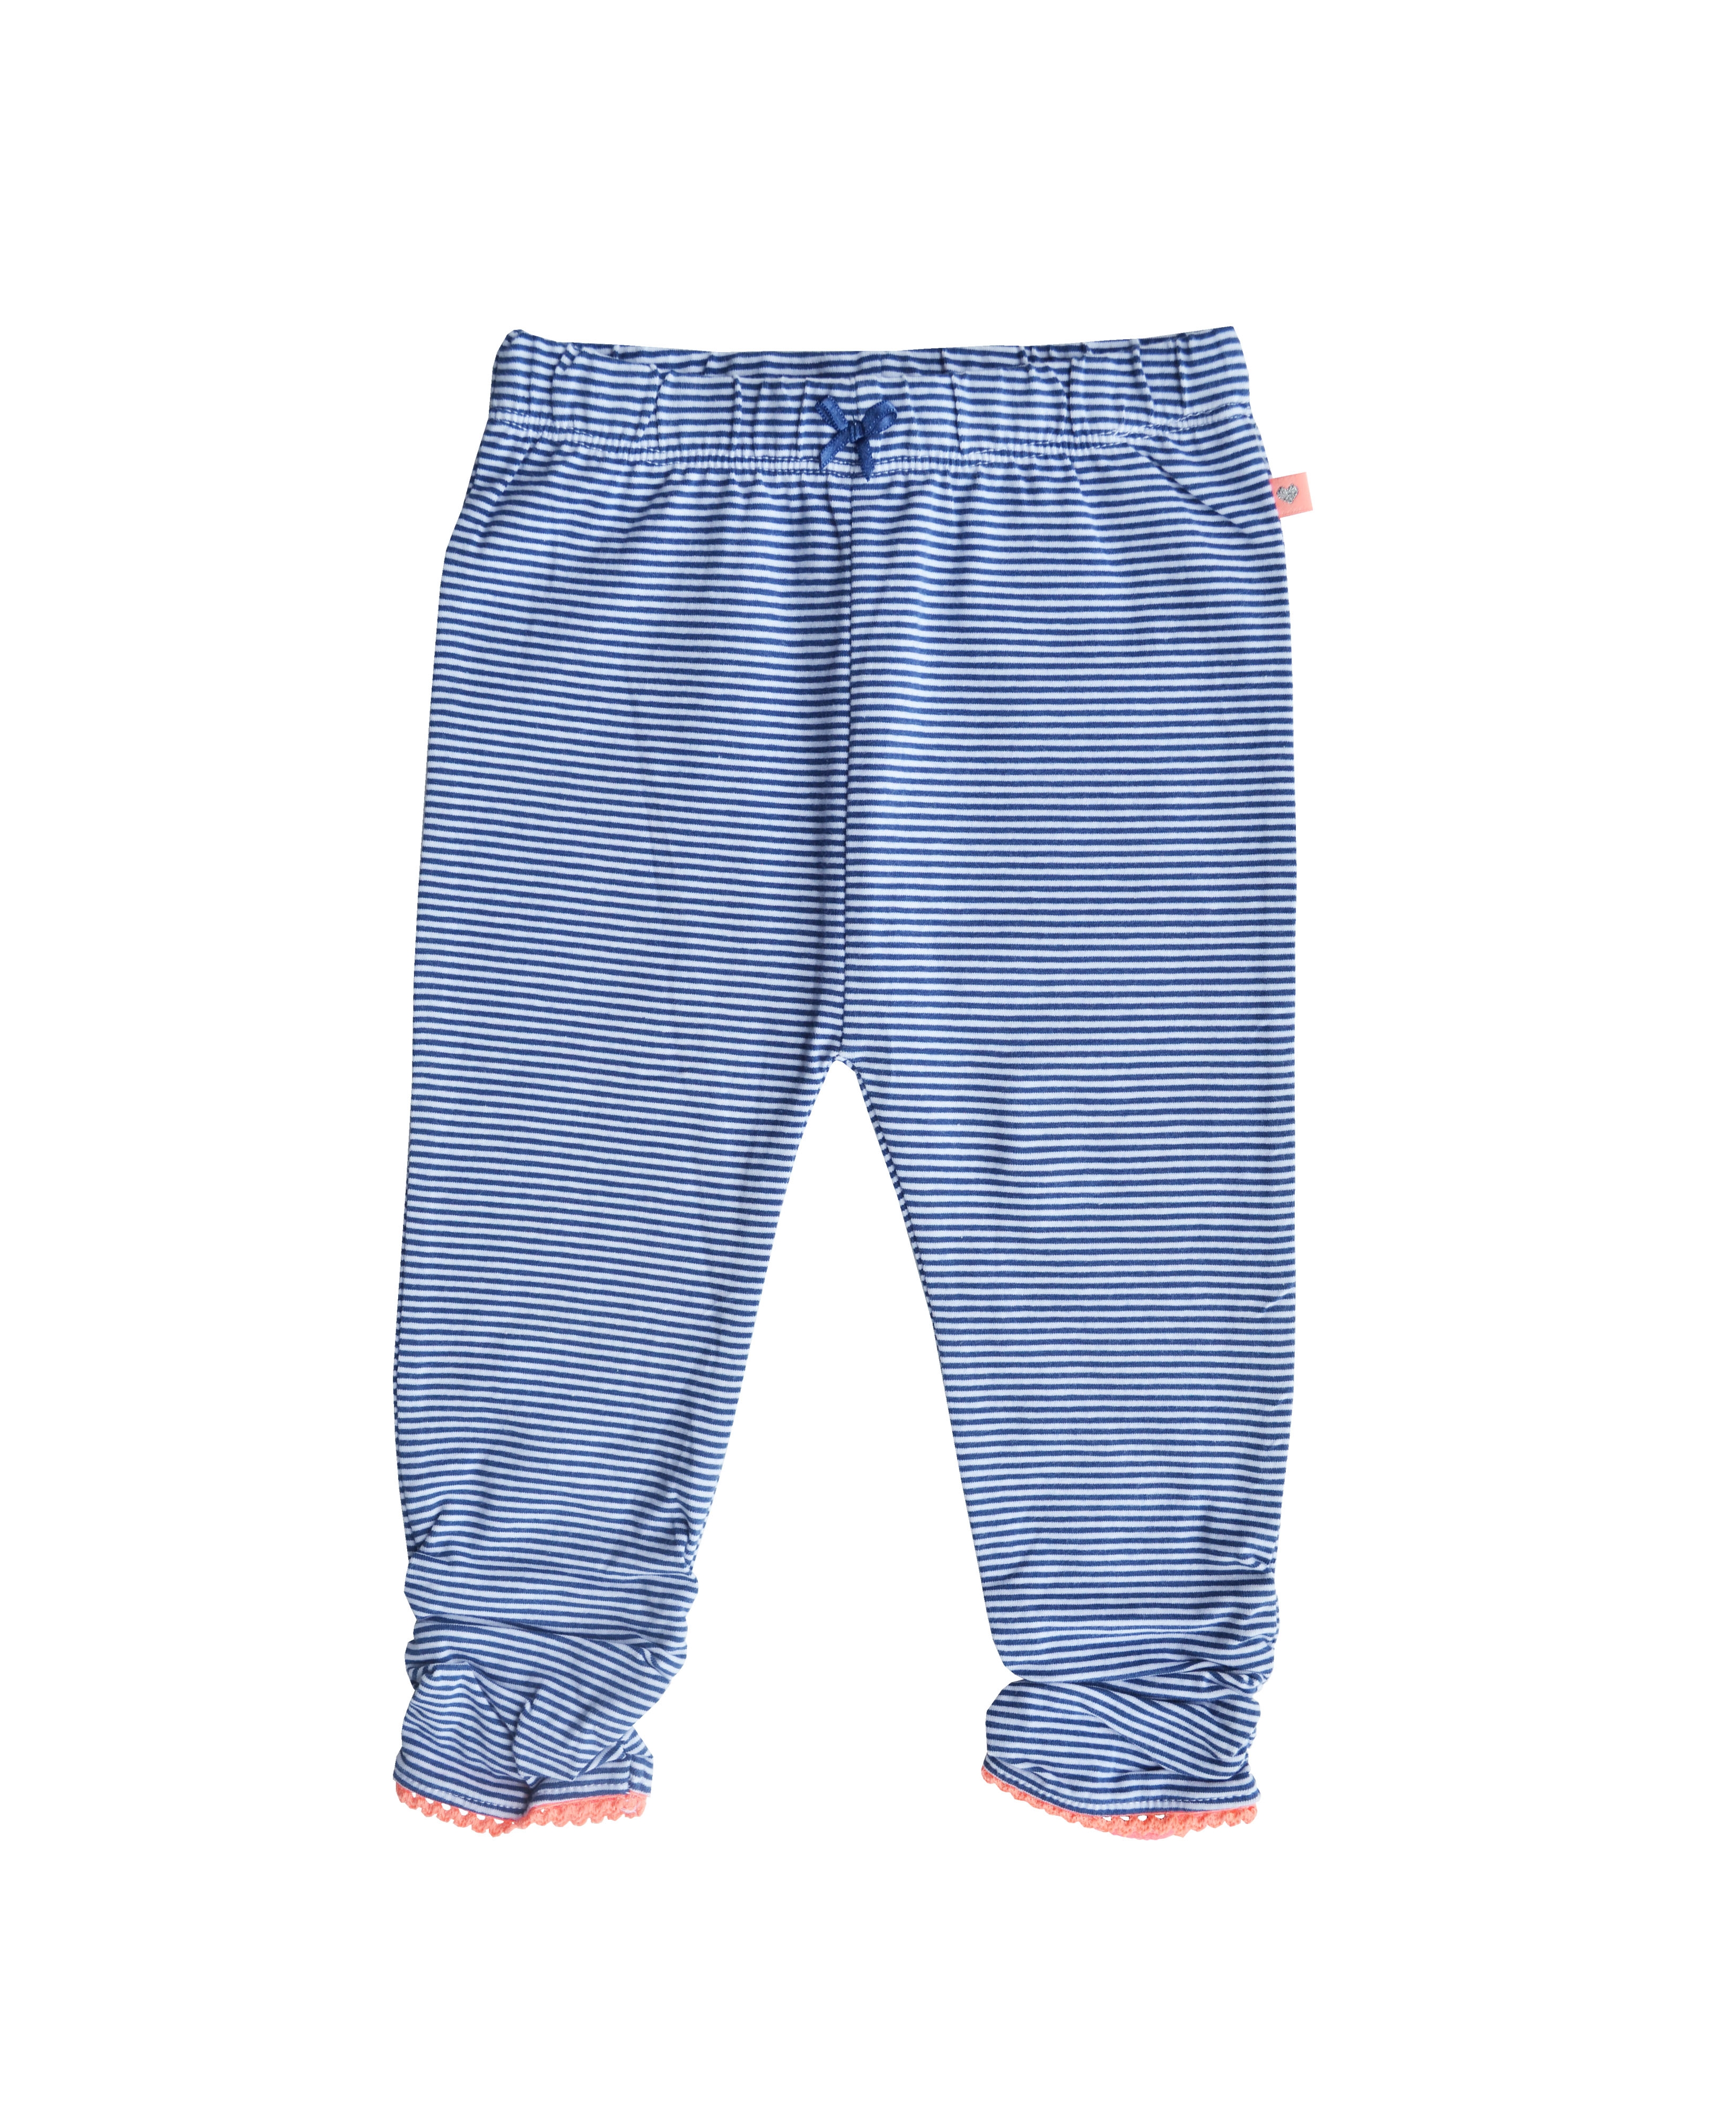 Babeez | Navy Stripe Leggings With Coral Lace at Bottom (95%Cotton 5%Elathan Jersey) undefined